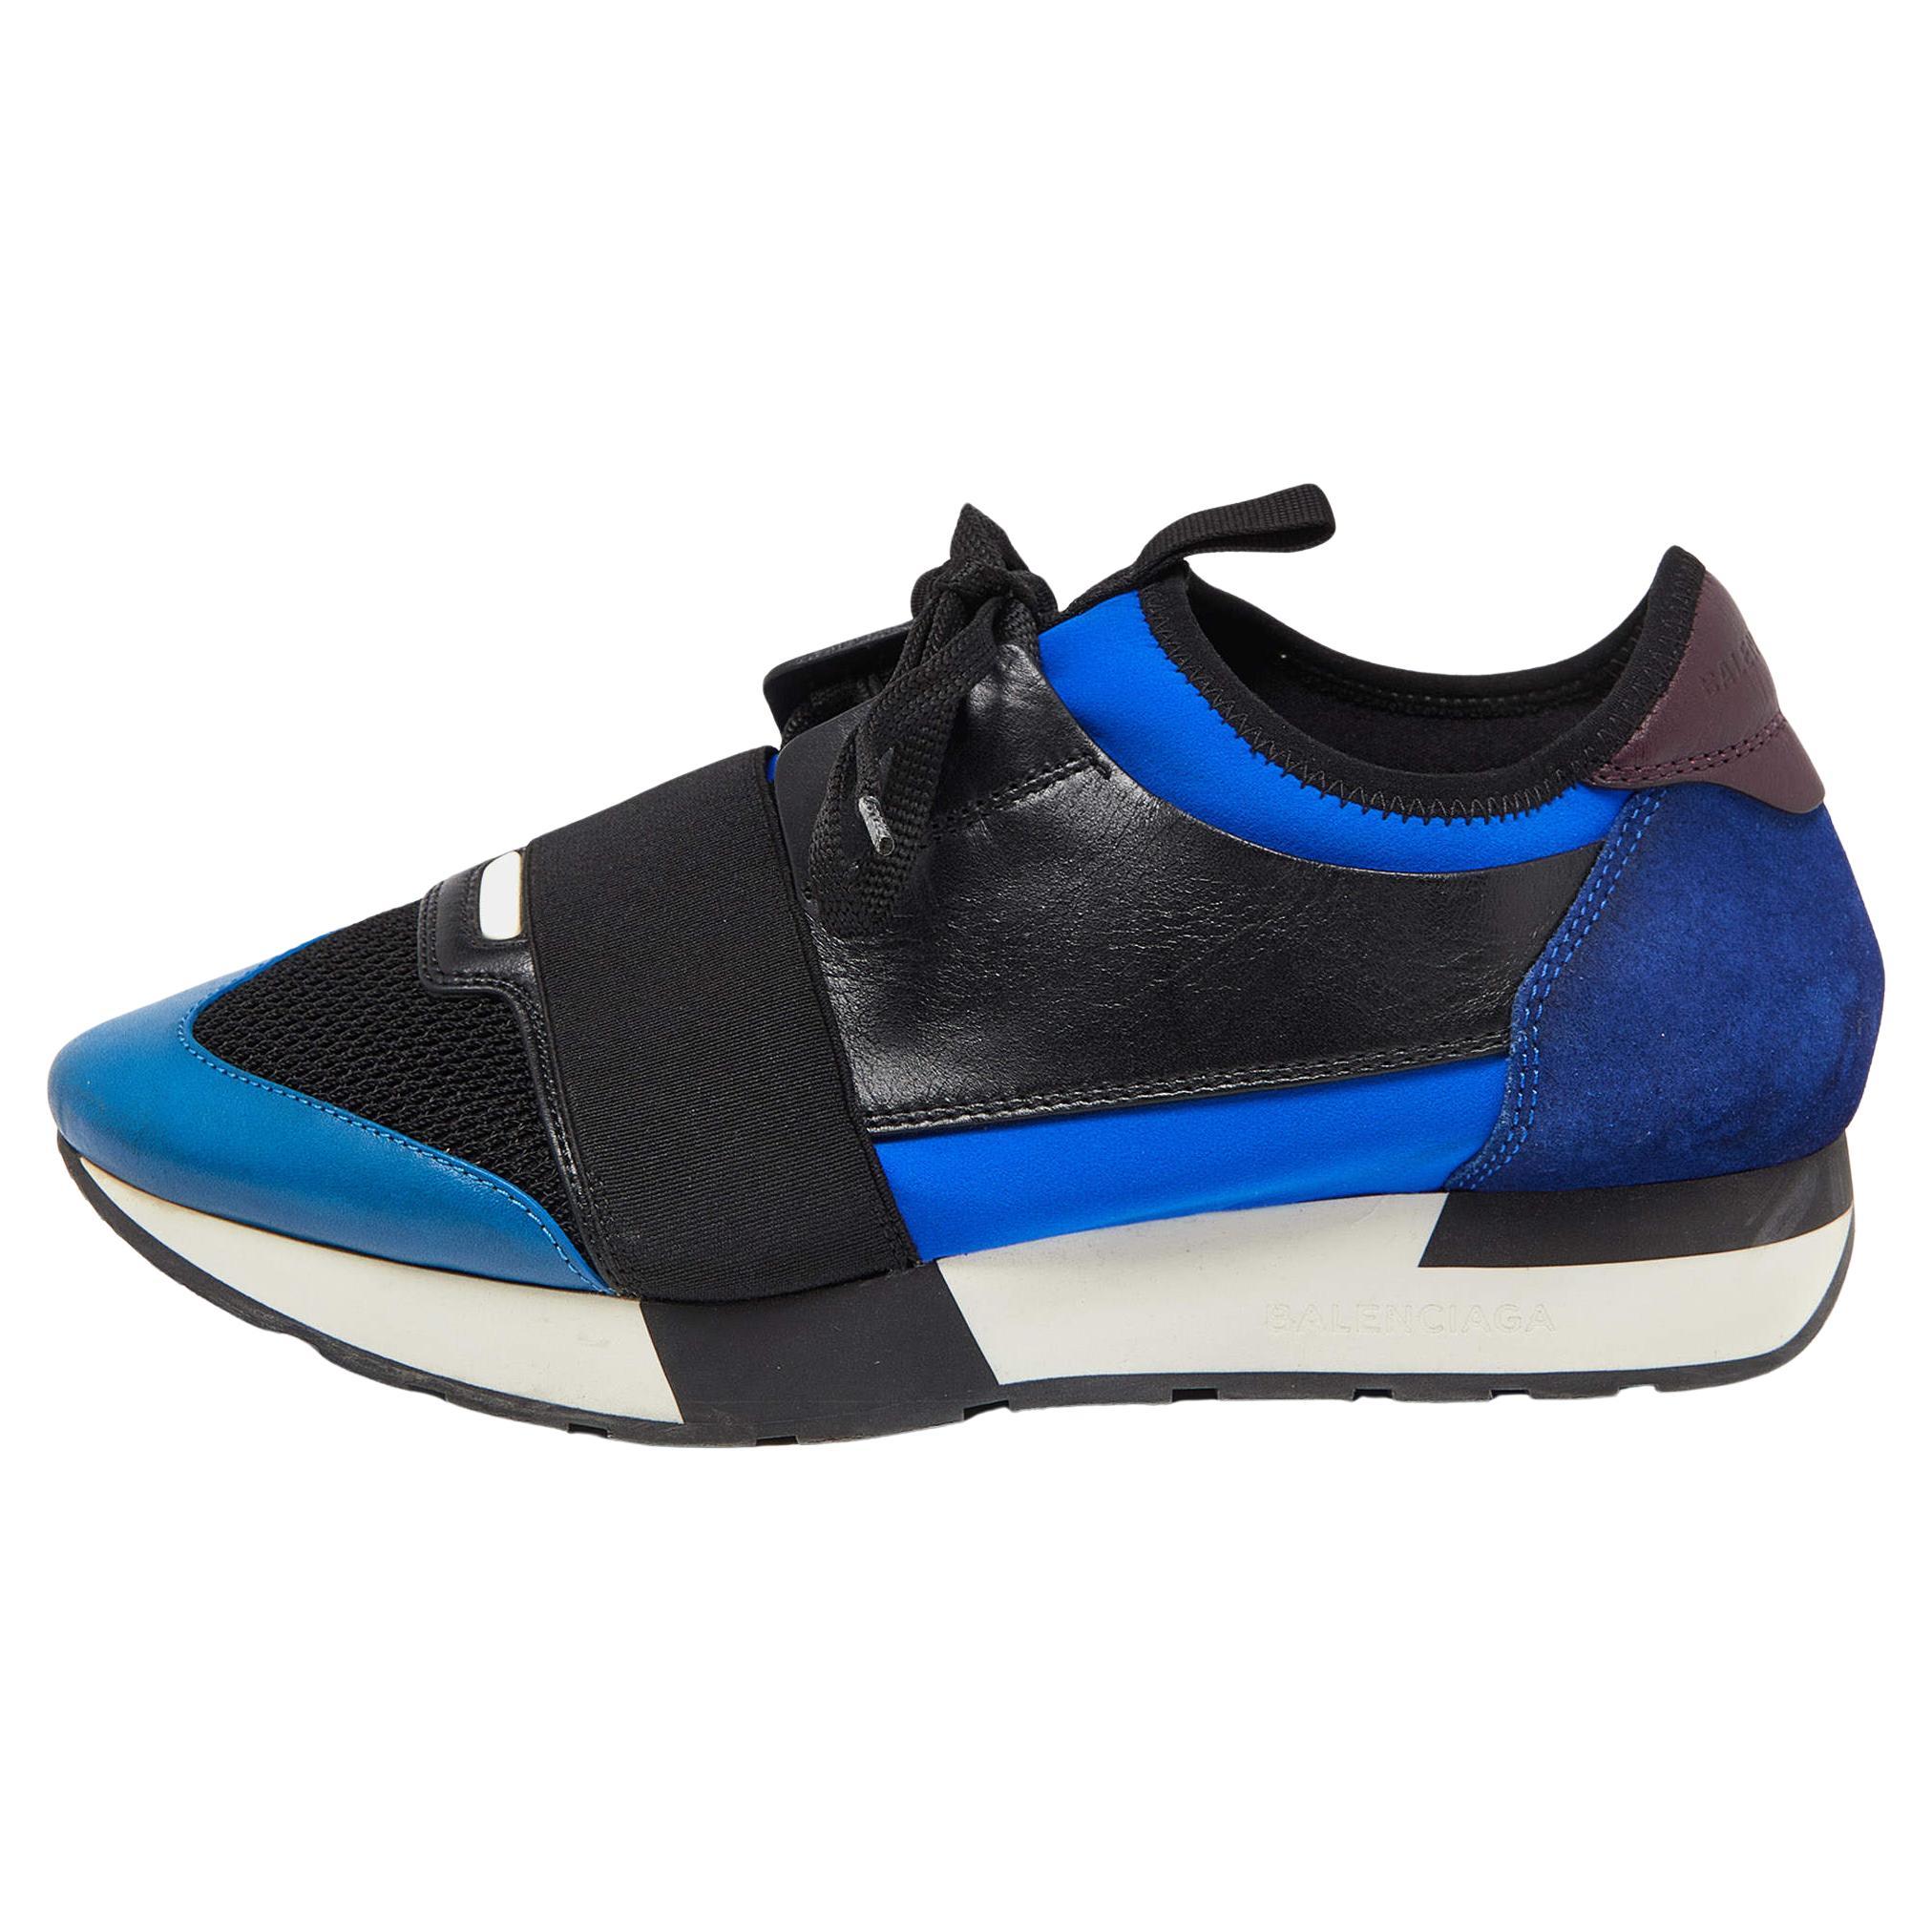 Balenciaga Tri Color Leather, Neoprene and Mesh Race Runner Sneakers Size 40 For Sale